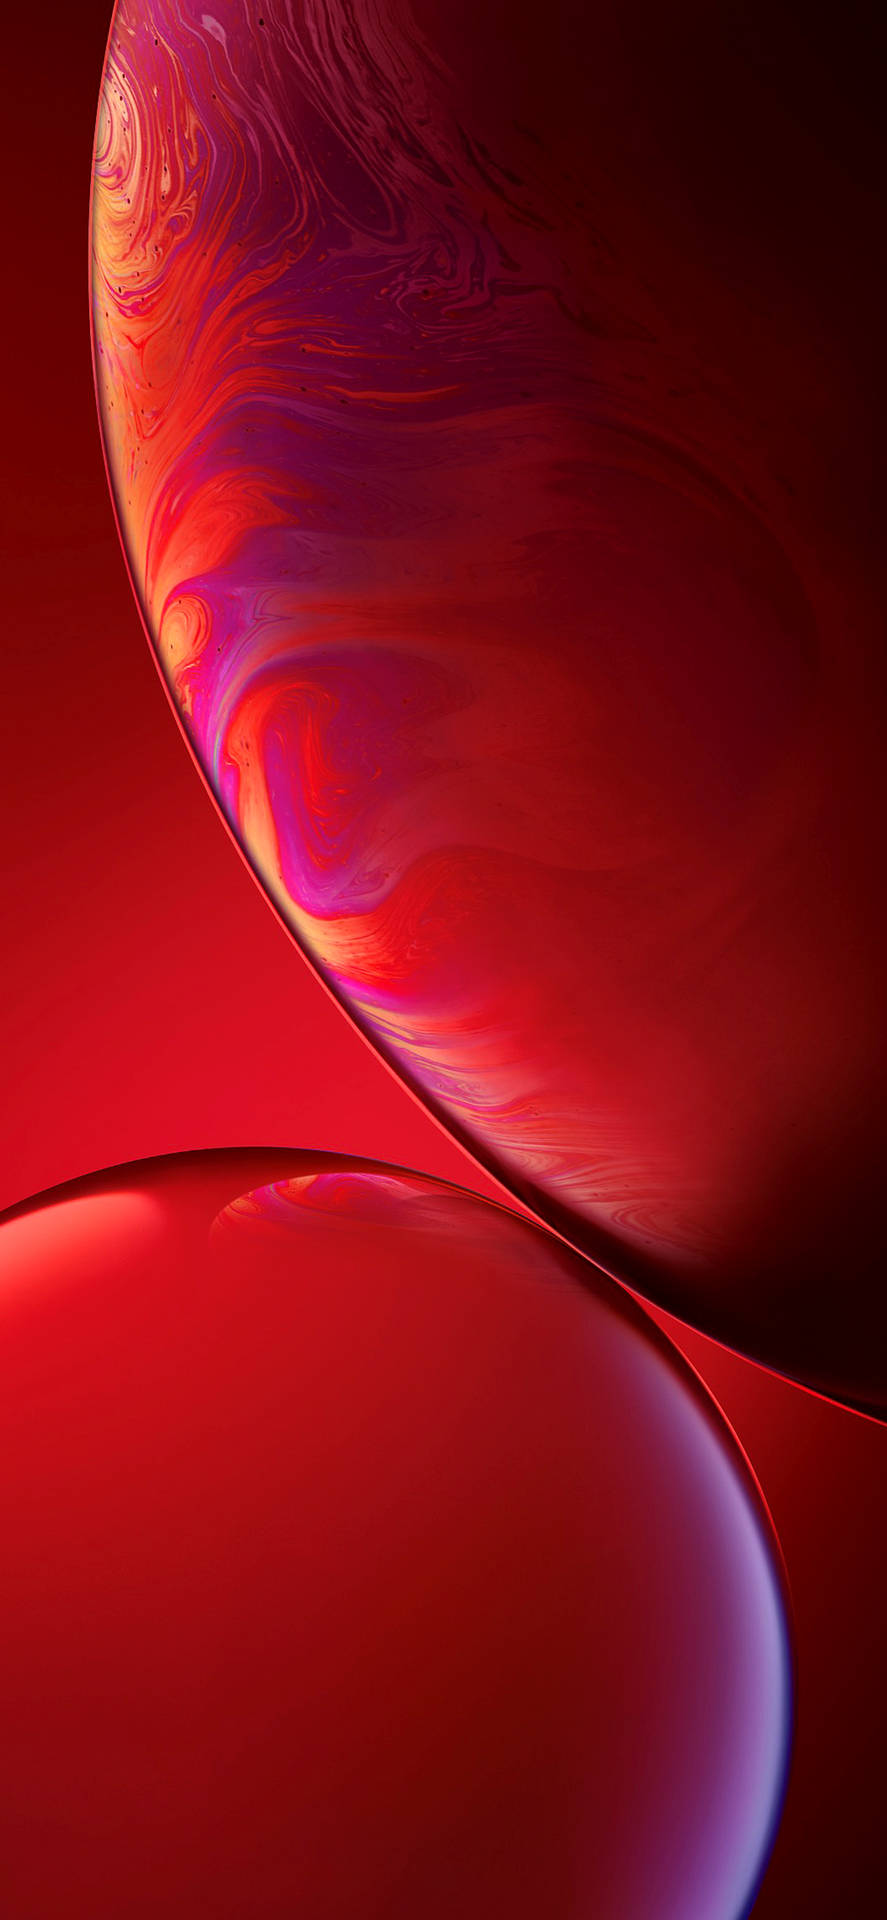 Red Bubble Aesthetic Iphone Xr Wallpaper